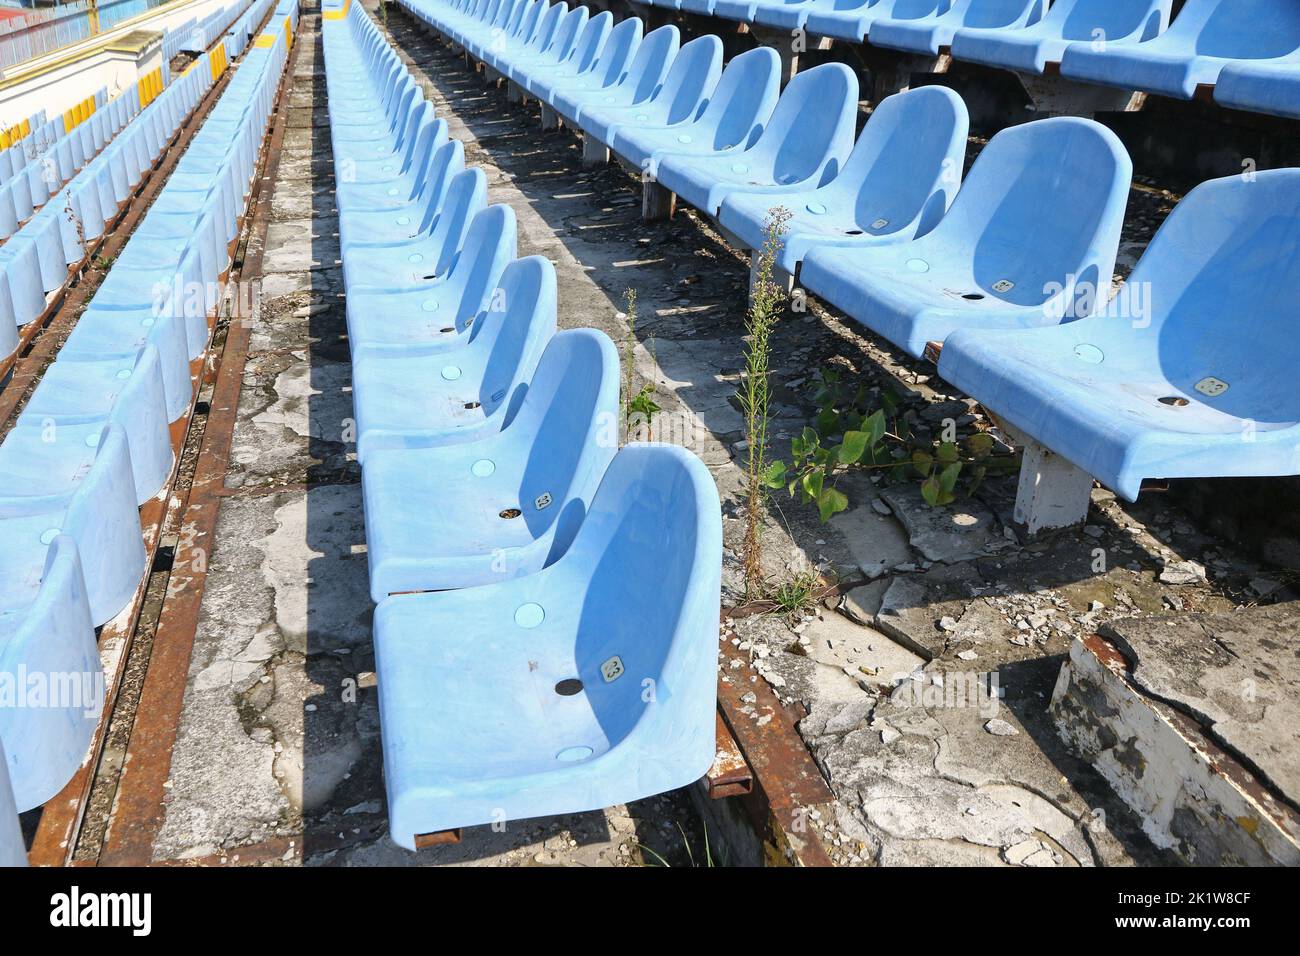 Details of football soccer stadium tribunes. Ruined steps, old blue seats Stock Photo